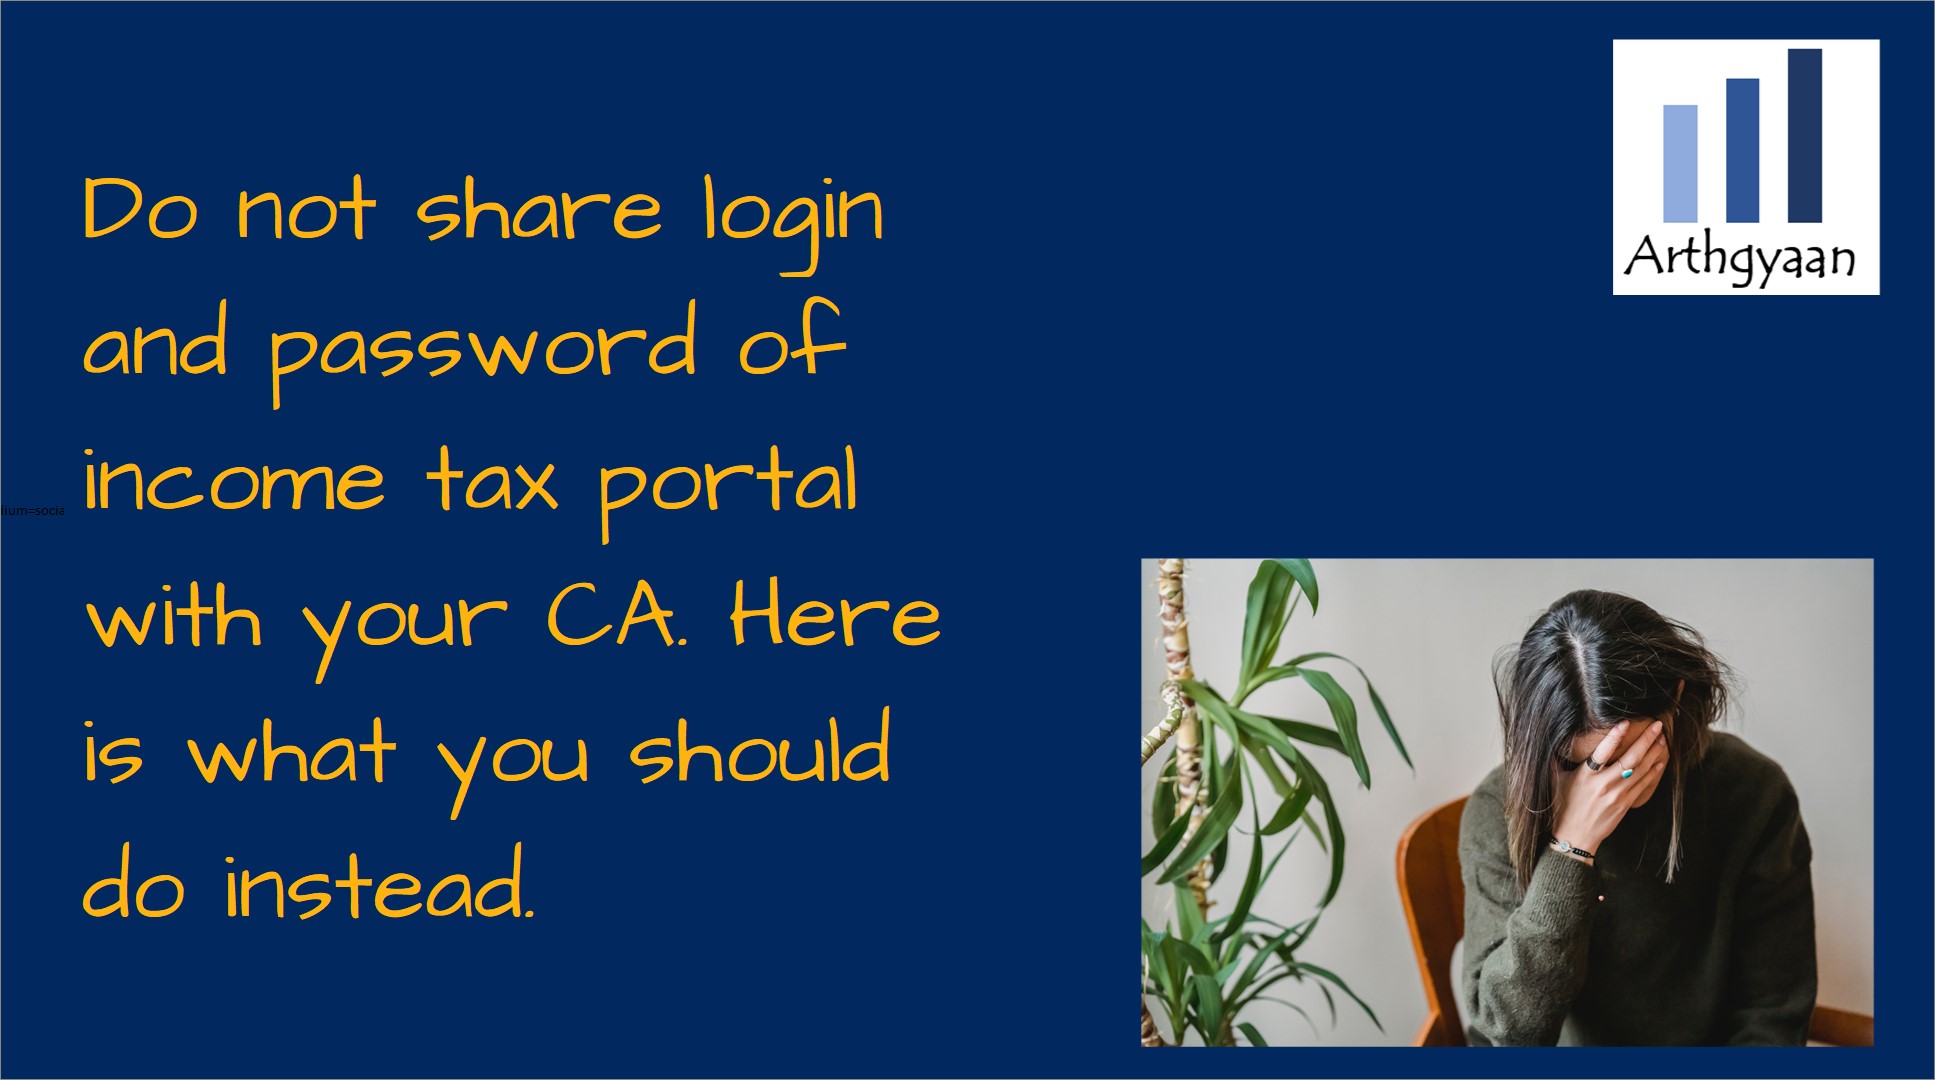 <p>The article shows you the right way to allow your CA or other intermediary to file your income tax return instead of sharing username and password.</p>

